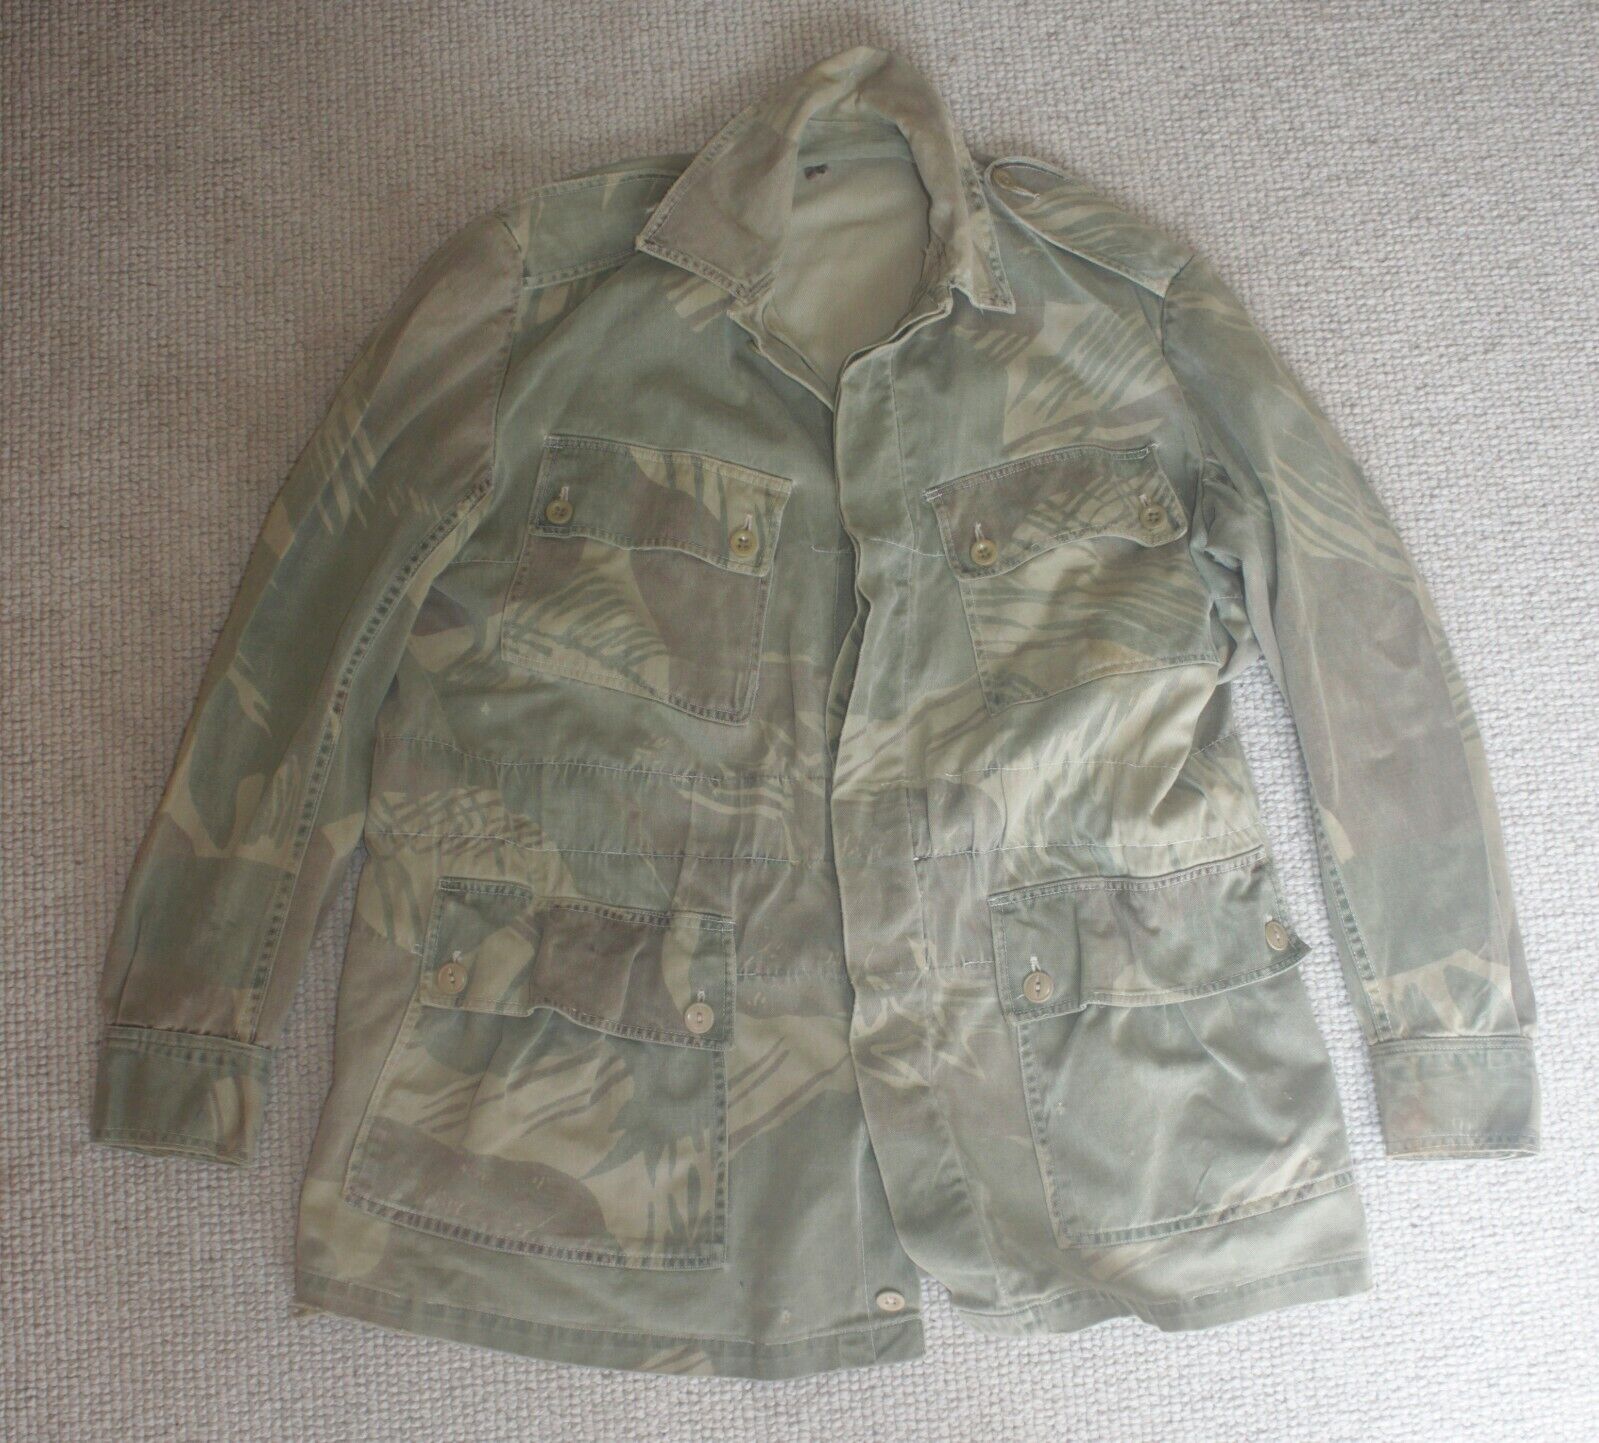 Original Rhodesian Camo Camouflage Jacket Size Large for Sale ...